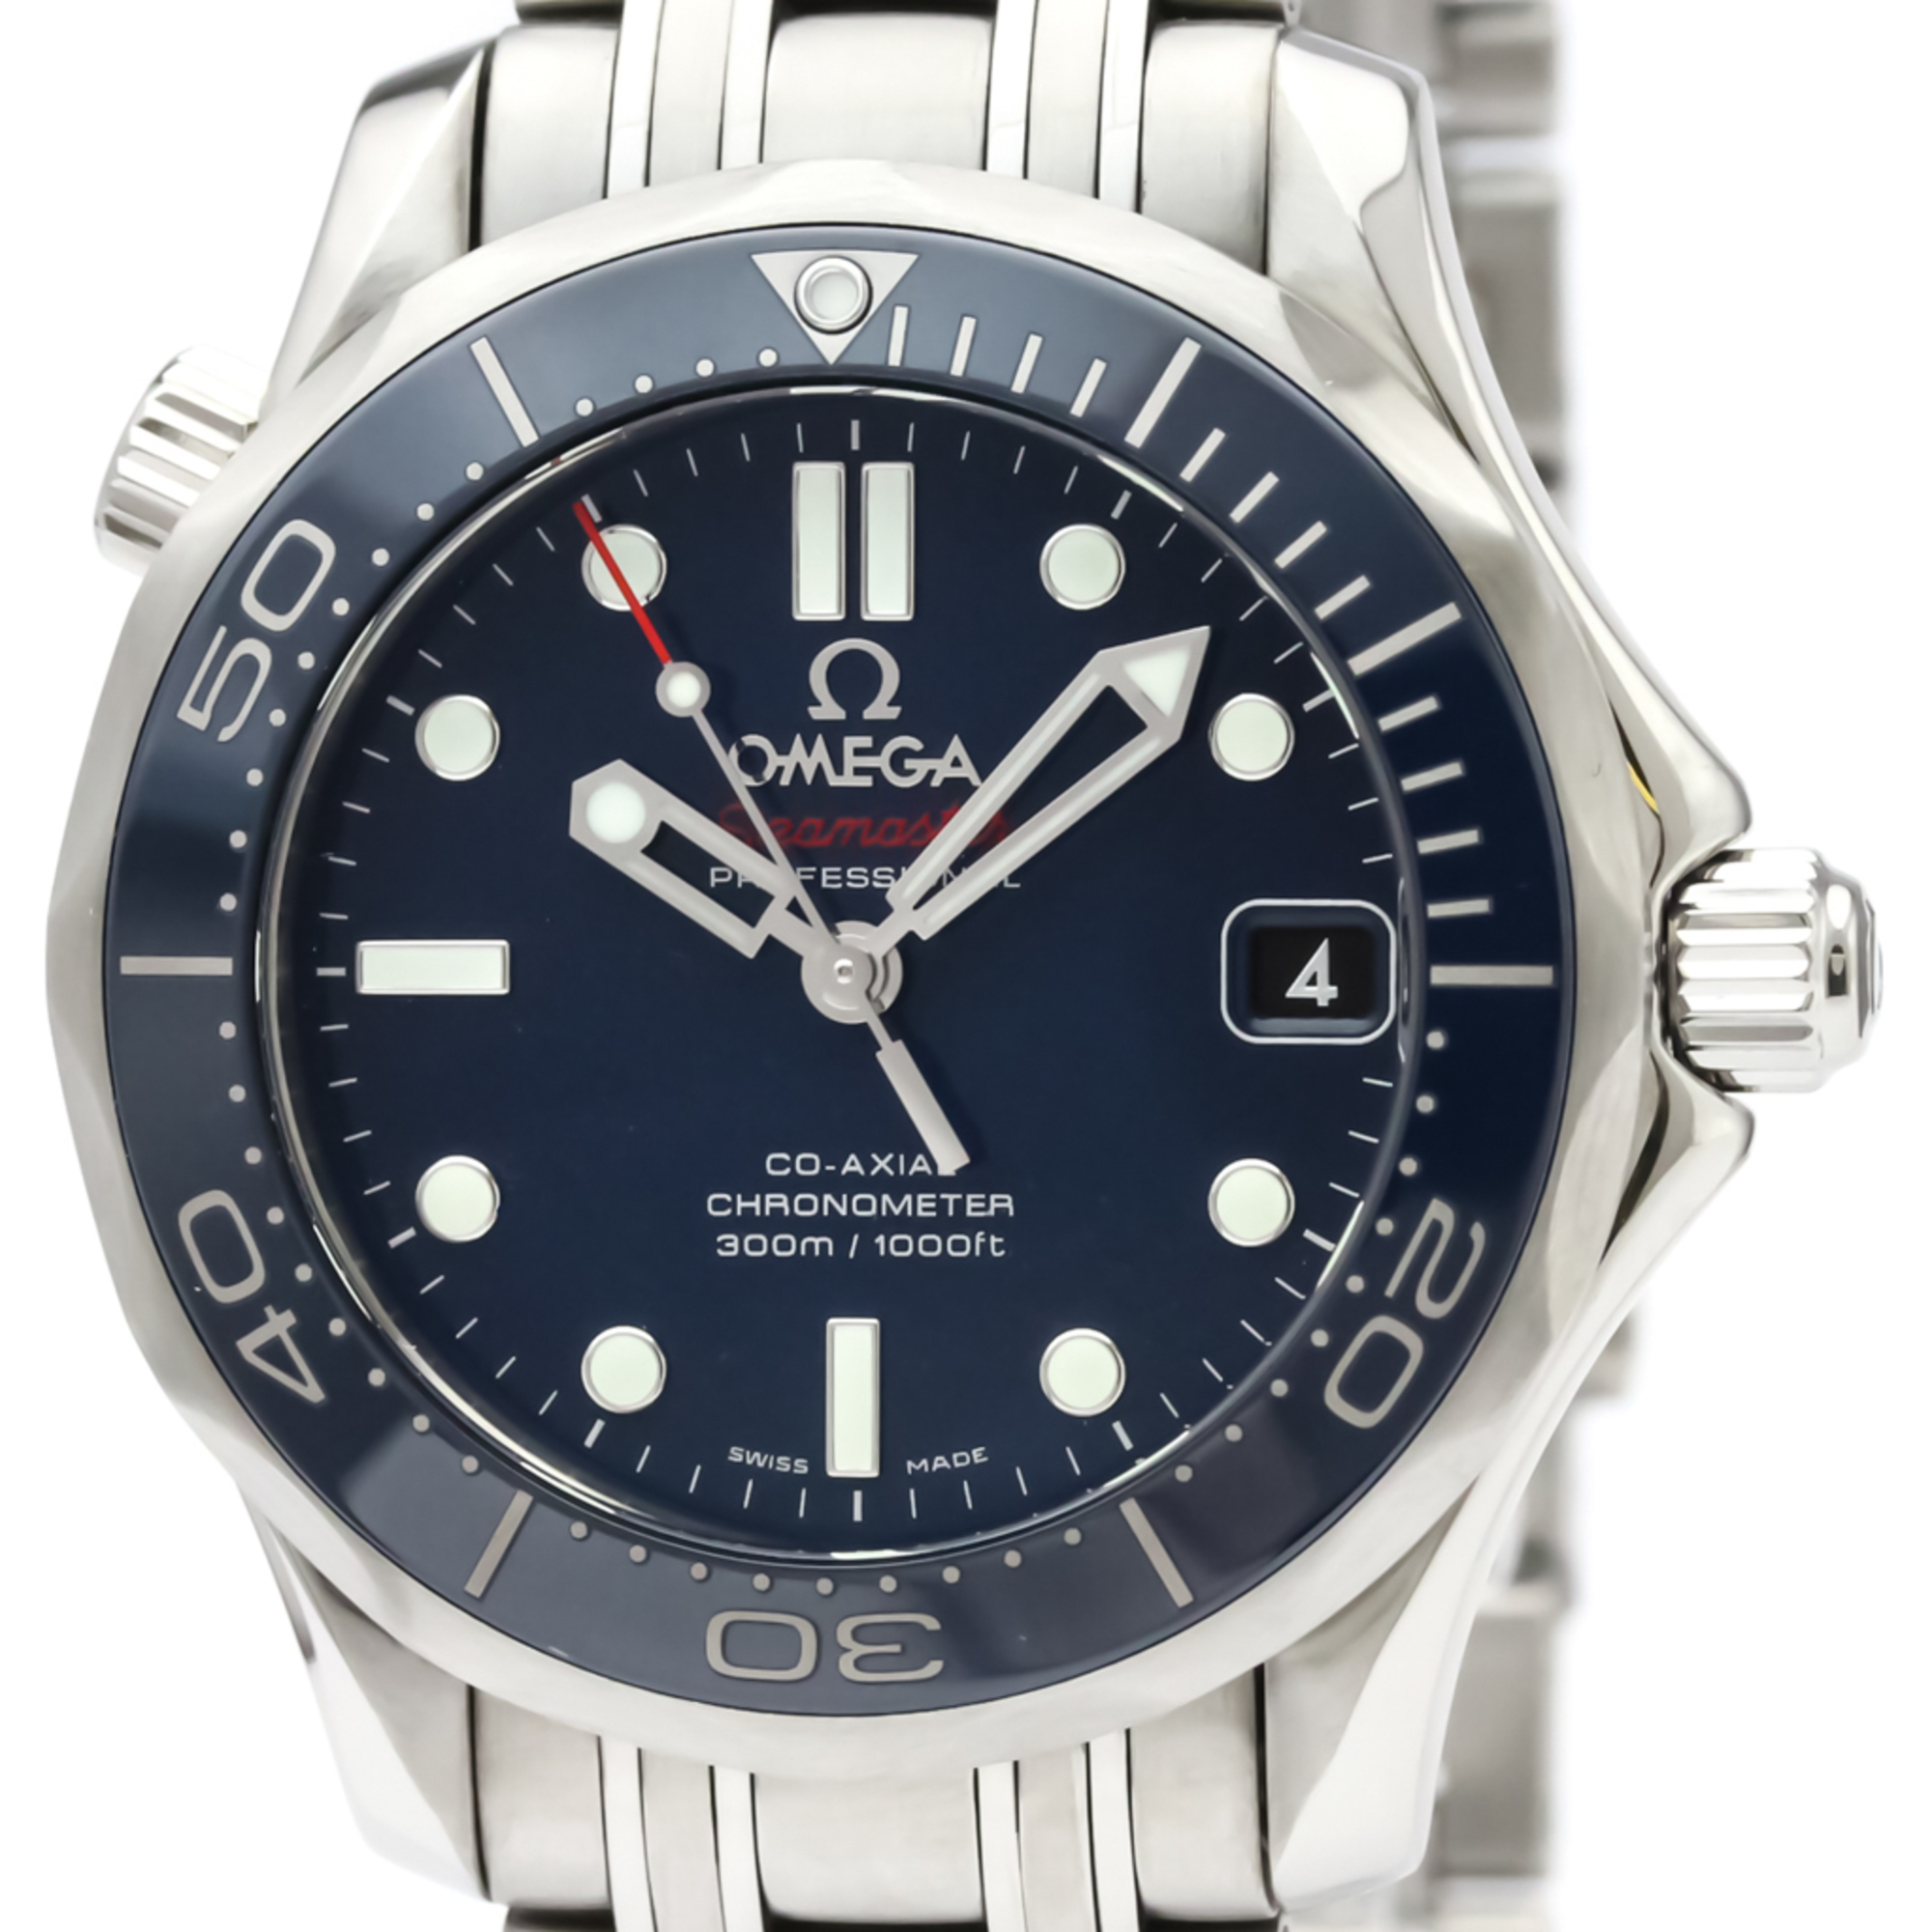 Omega Seamaster Automatic Stainless Steel Men's Sports Watch 212.30.36.20.03.001